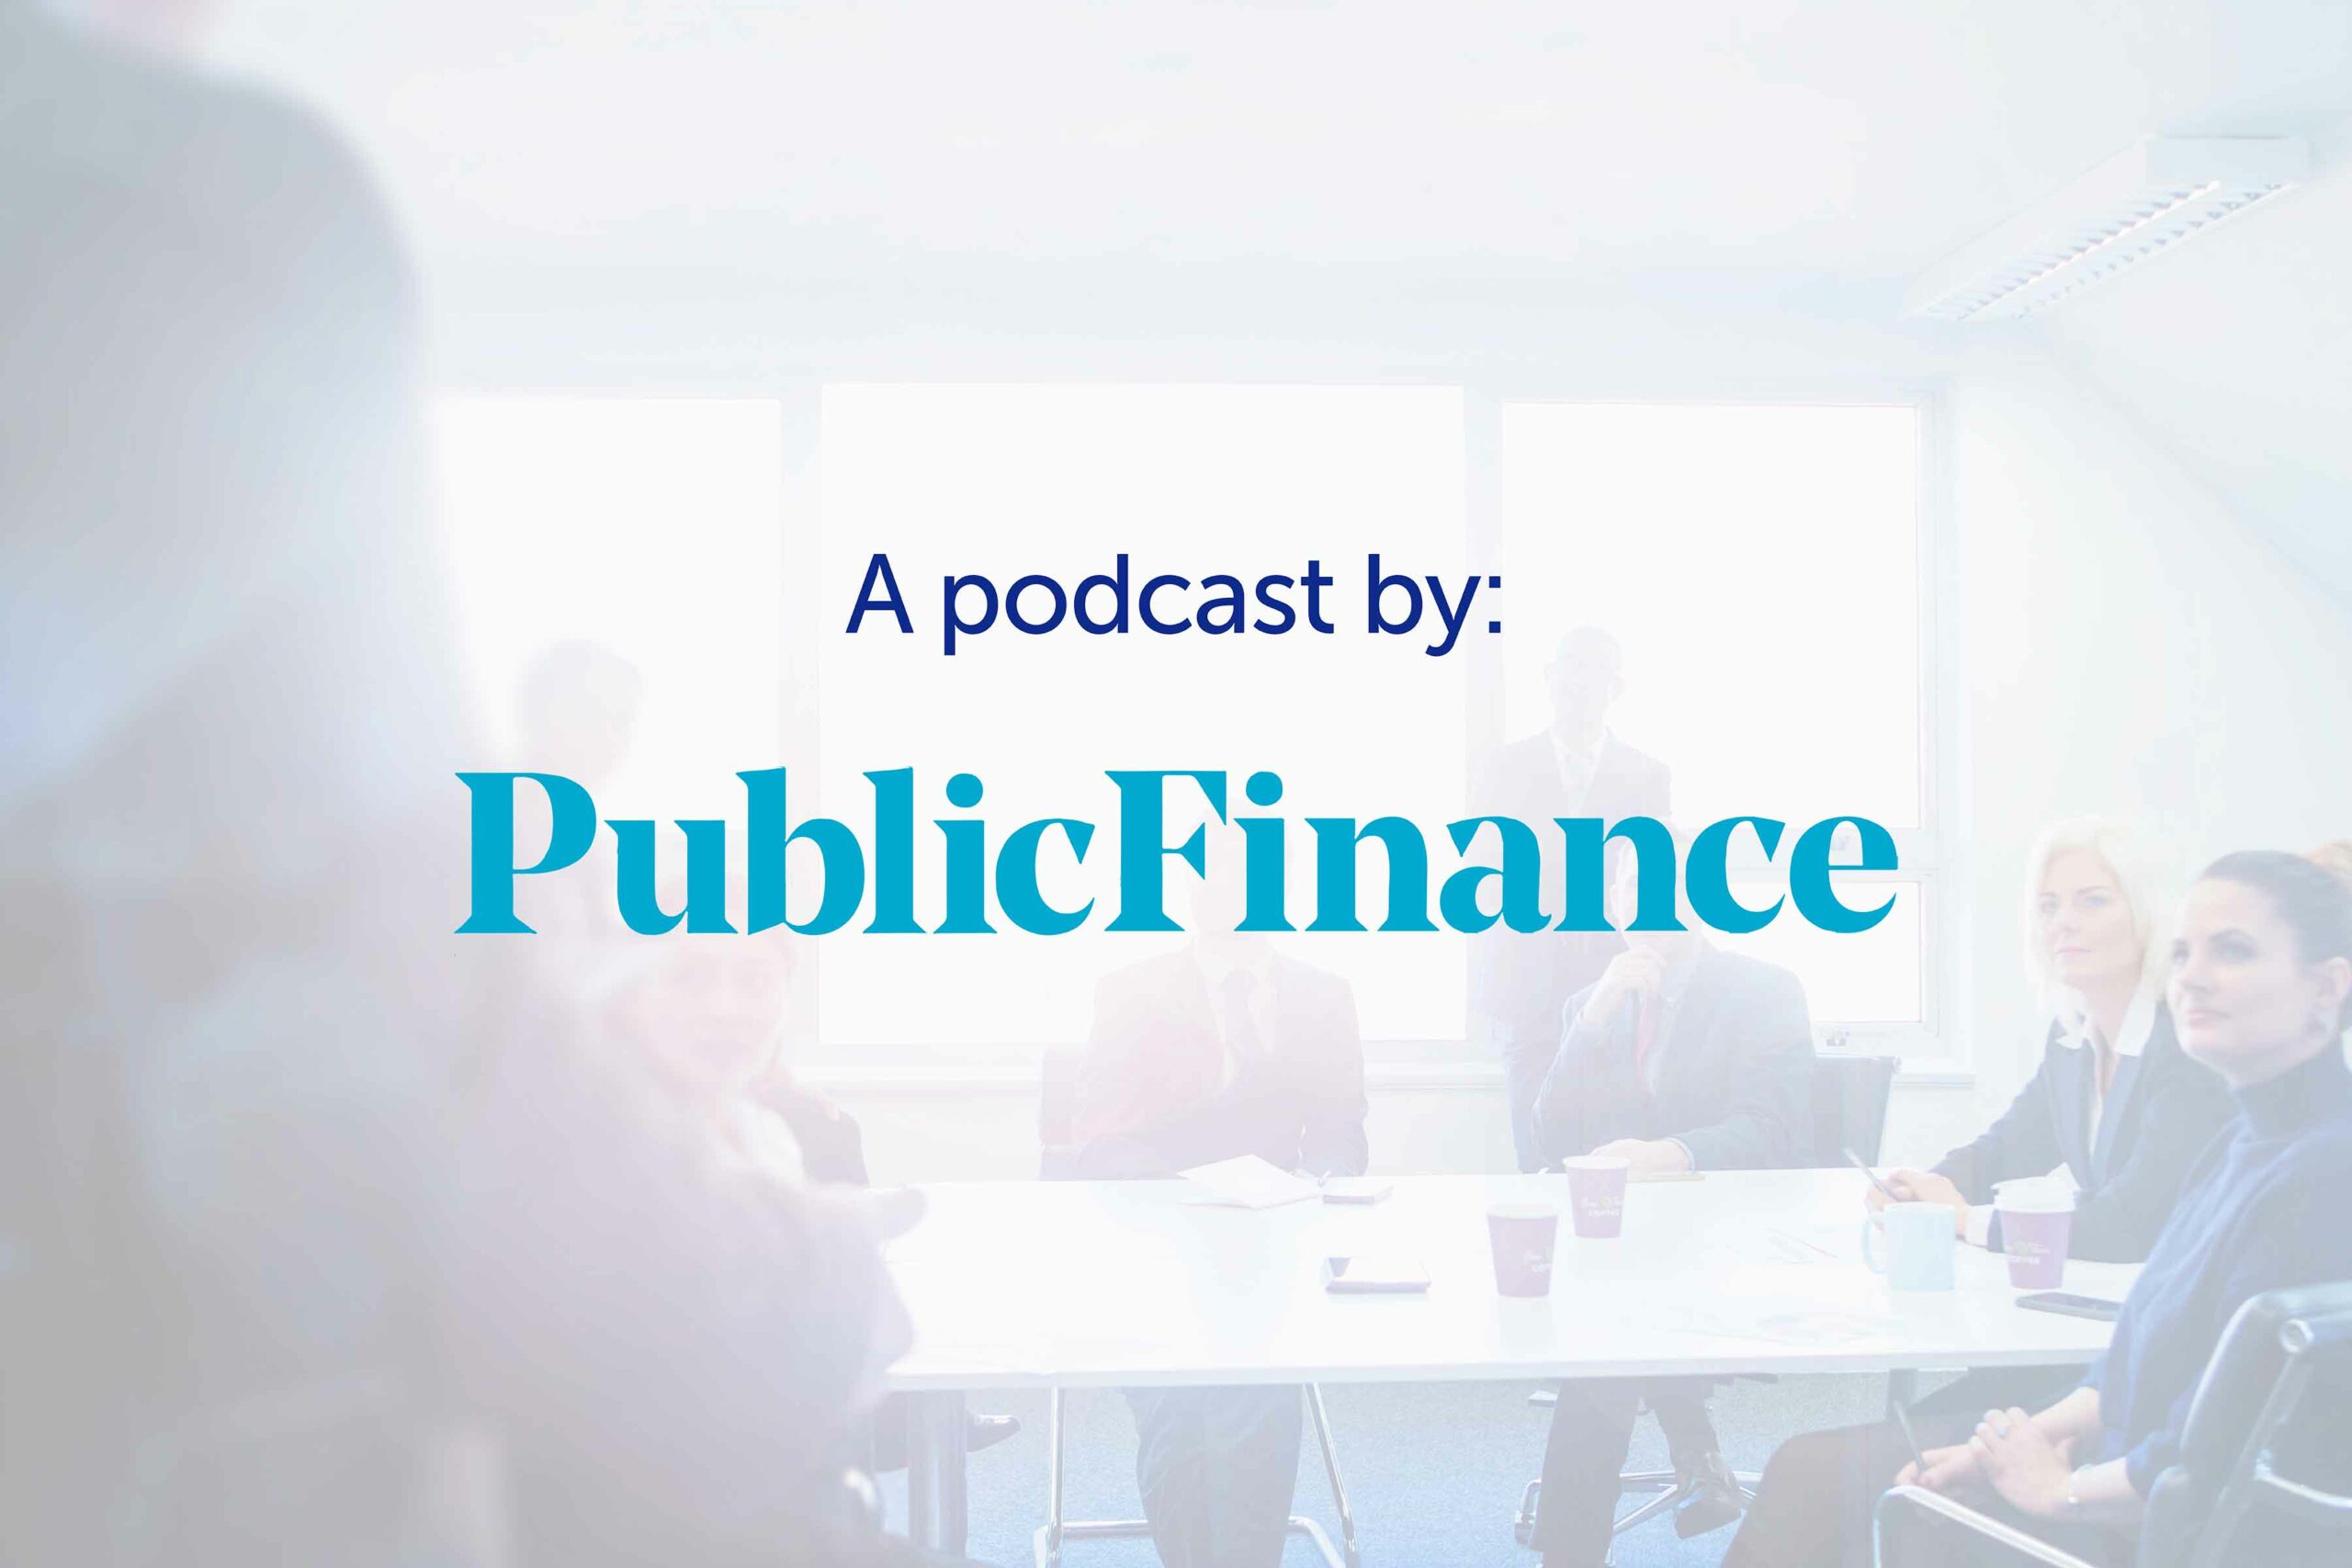 A podcast by Public Finance